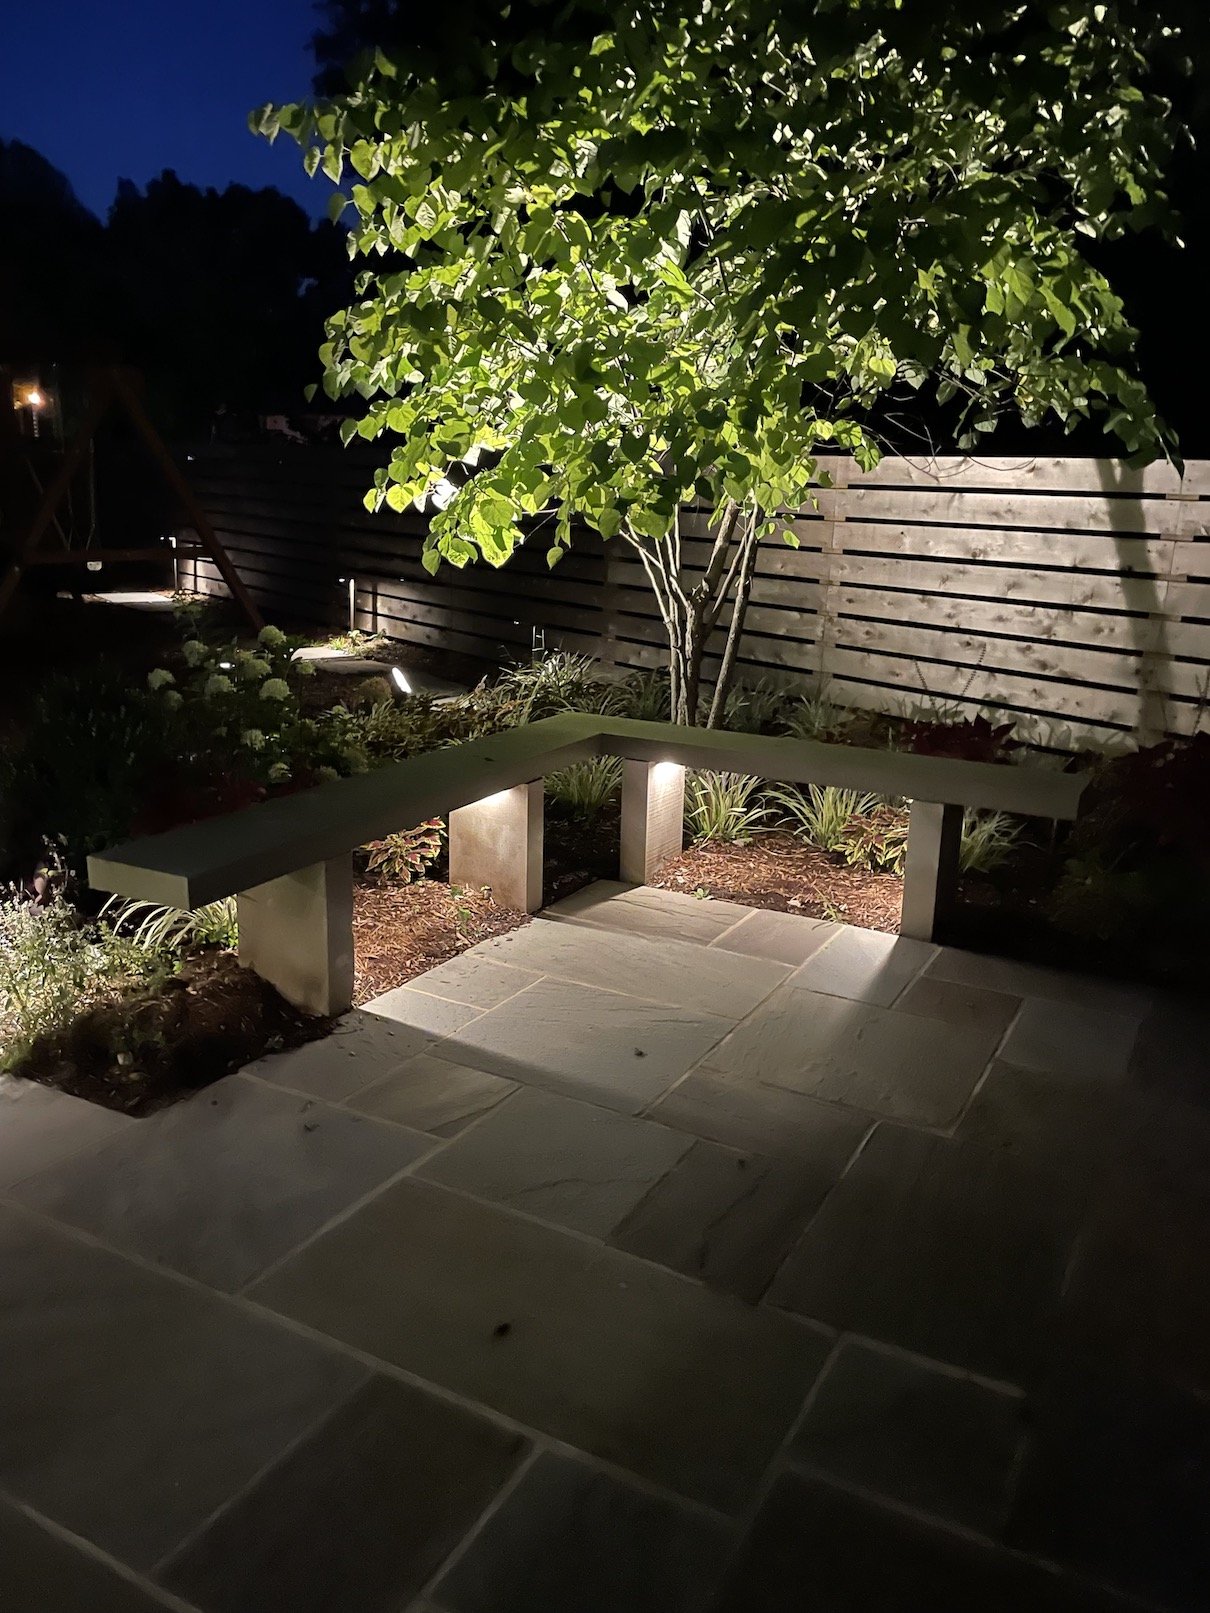 Bench lighting in outdoor patio area with beautiful landscape design, a natural wood fence and stonework in northern nj backyard.jpg